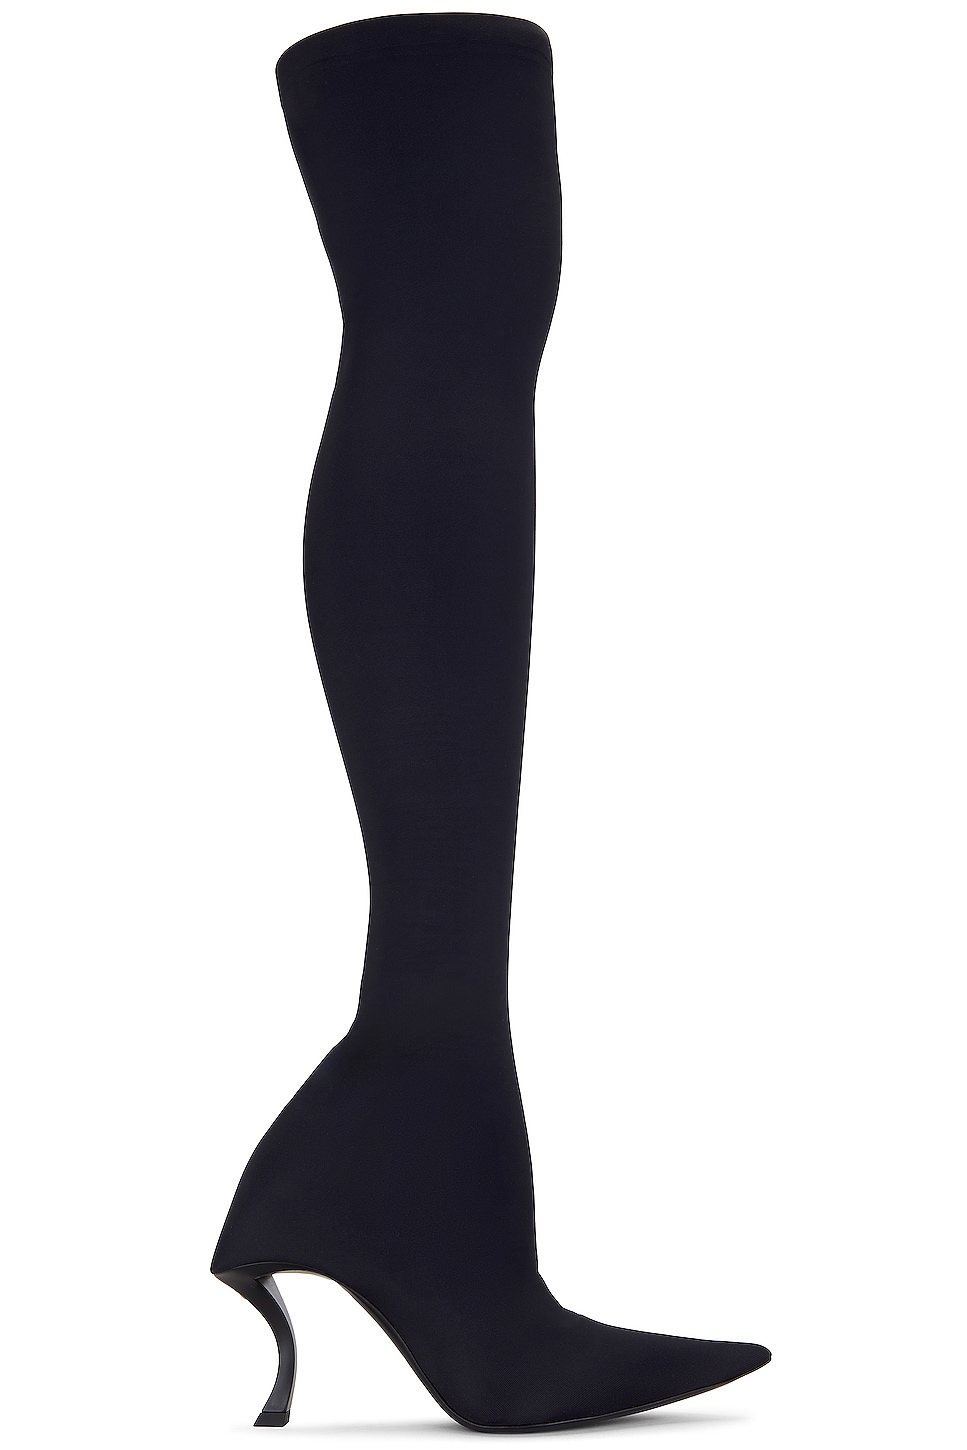 Image 1 of Balenciaga Hourglass Over The Knee Boot in Black